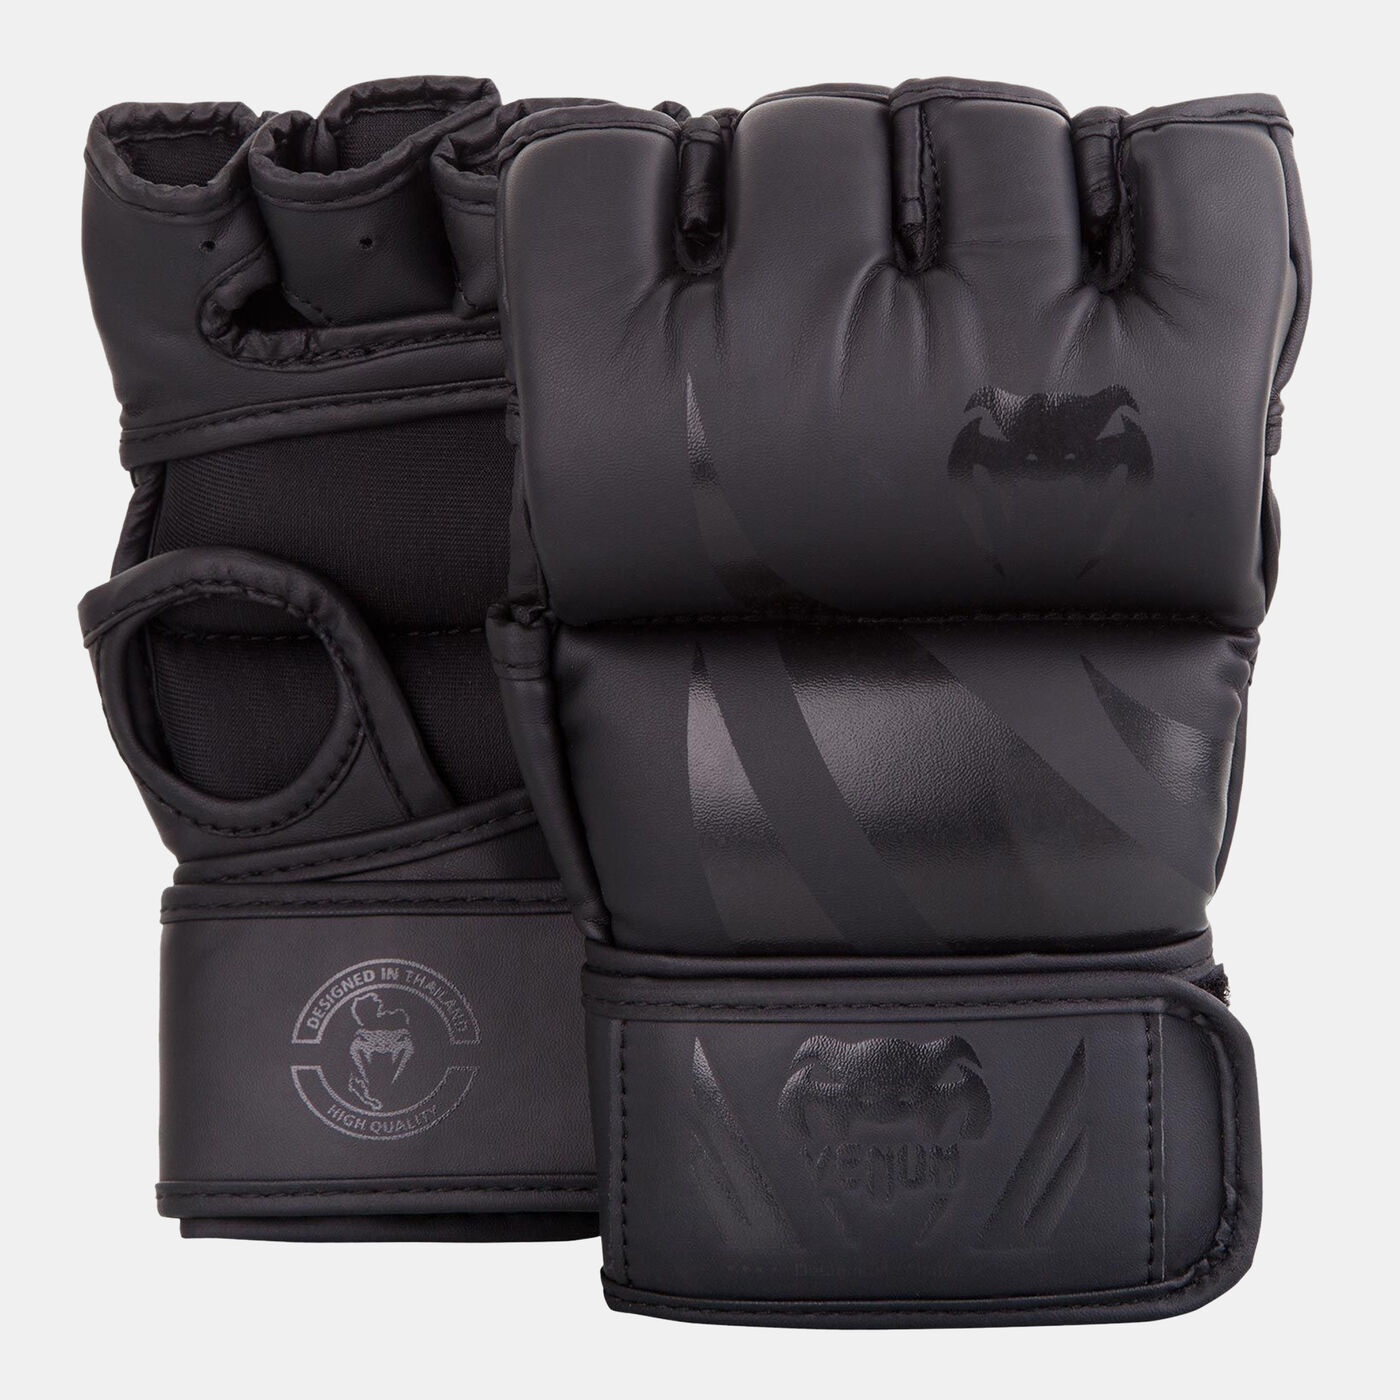 Challenger MMA Gloves (Without Thumb)